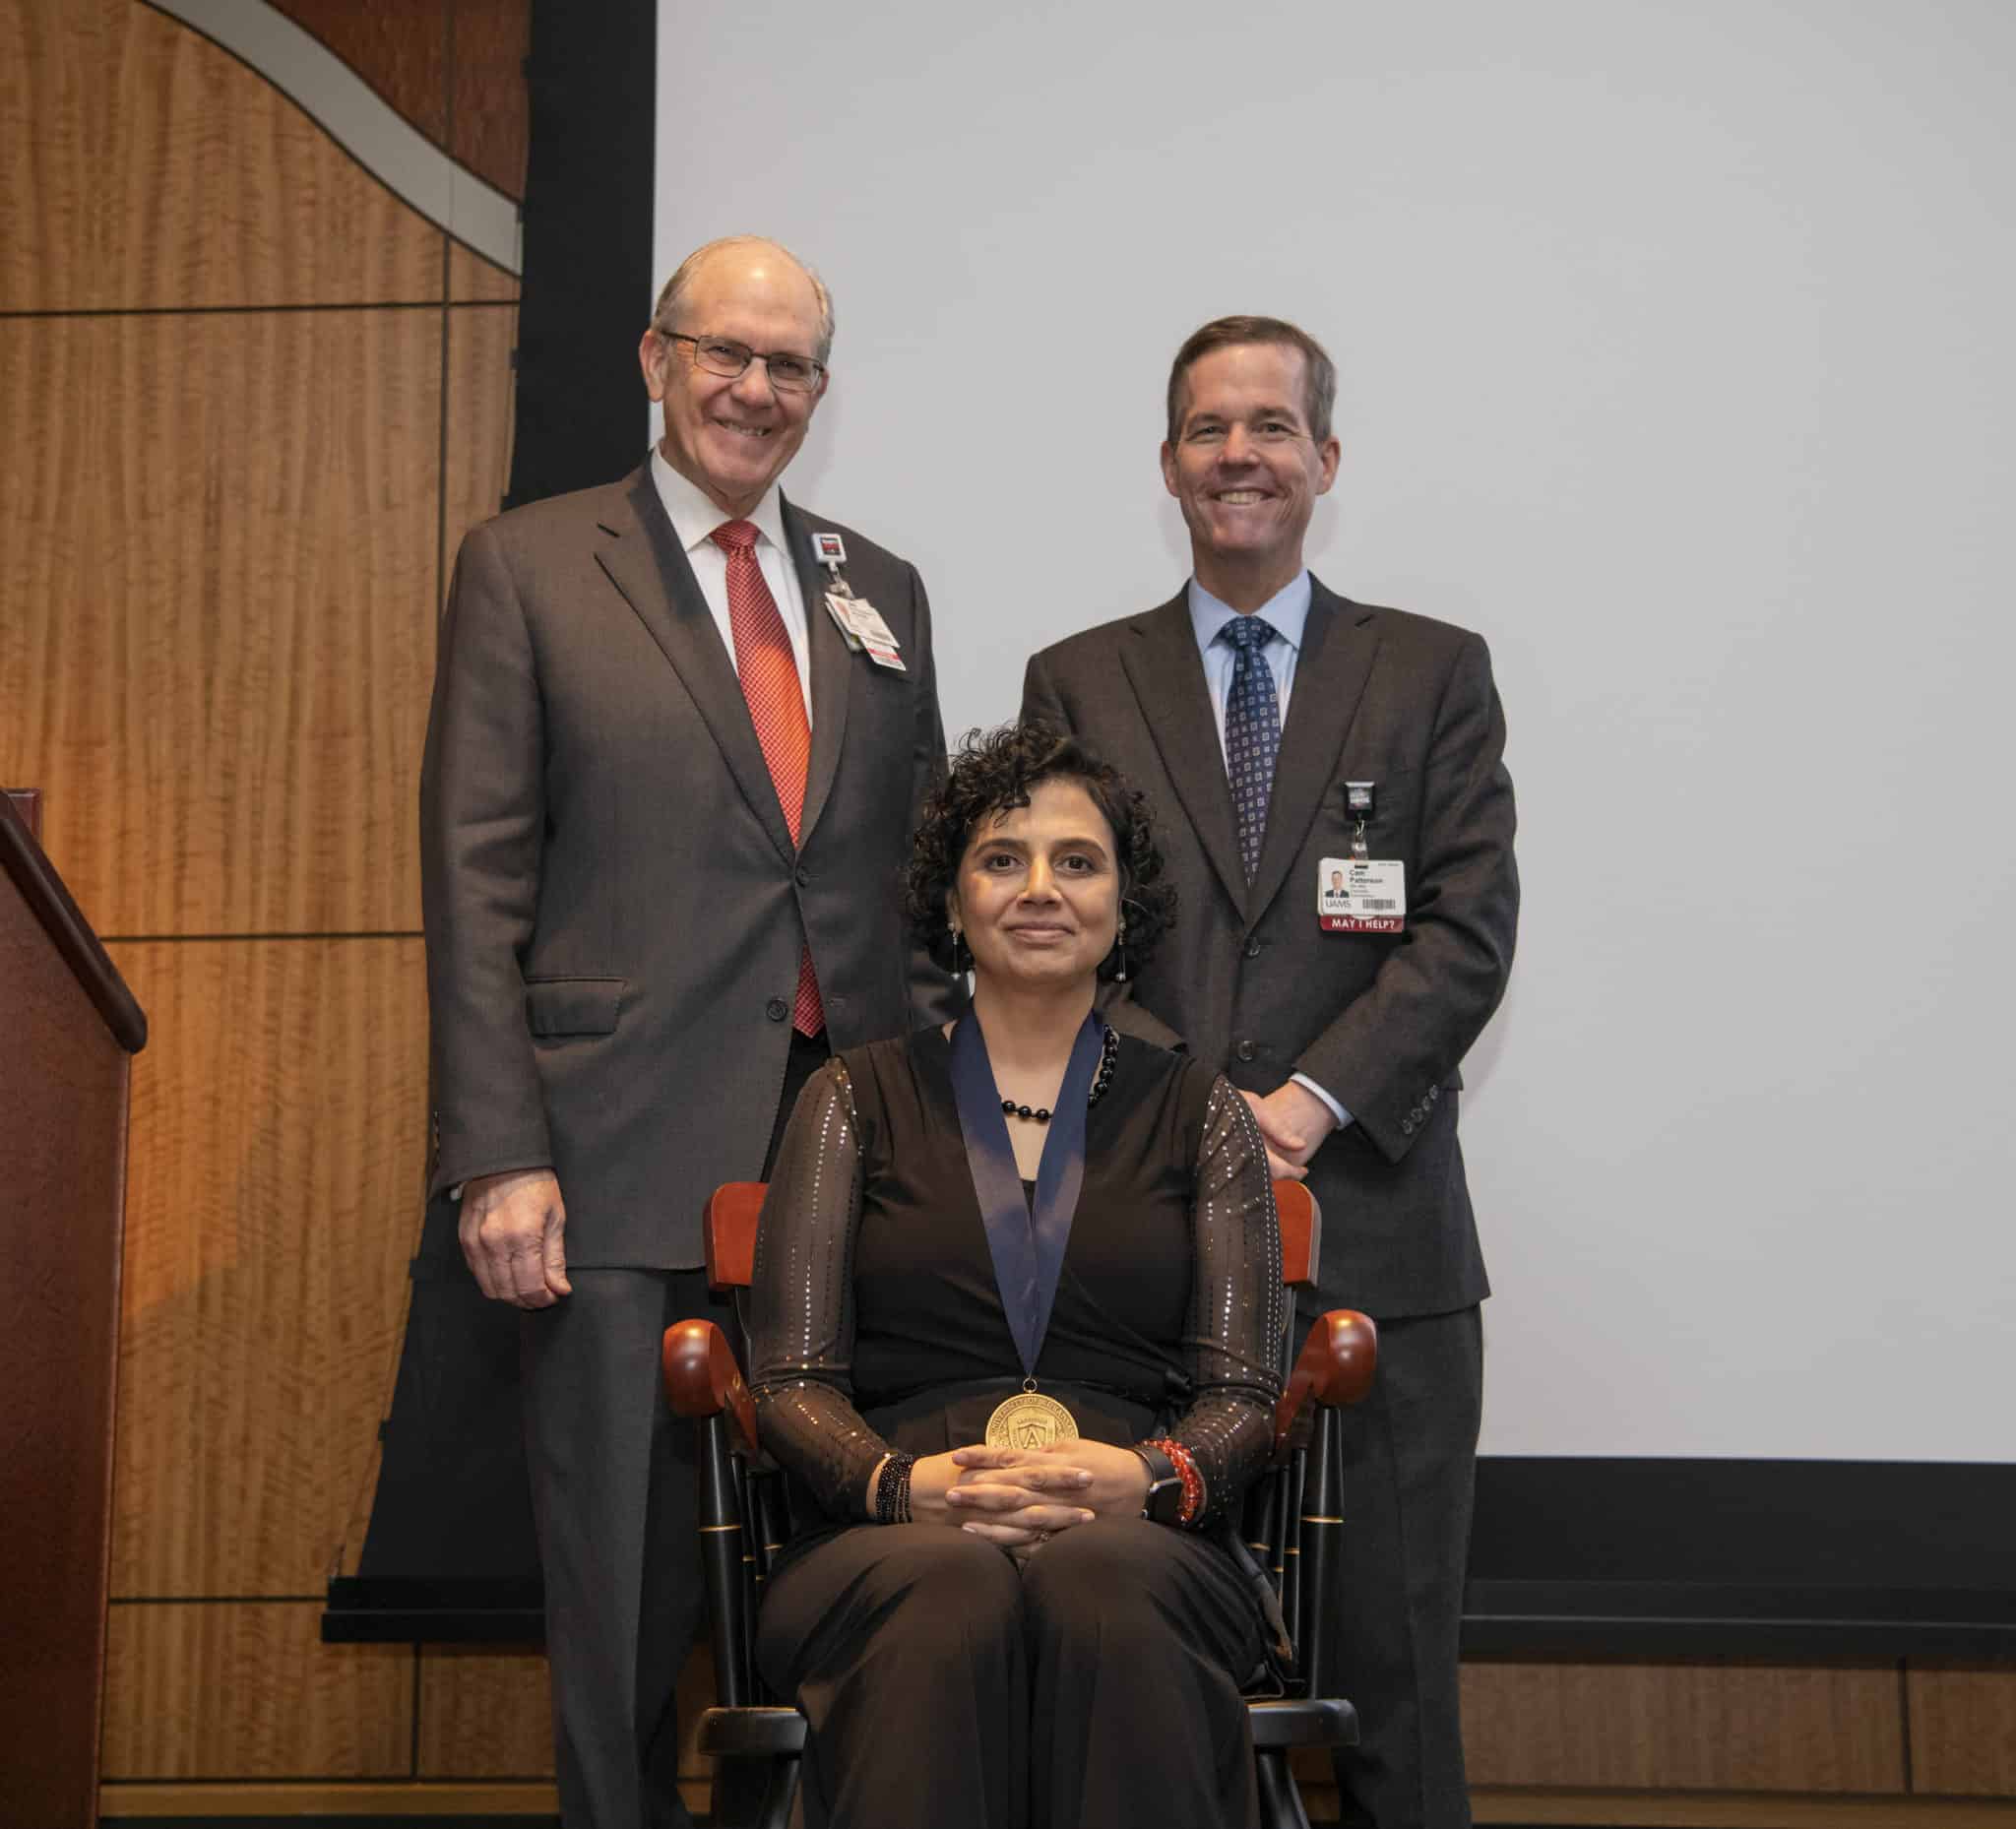 Mendiratta was presented with a commemorative medallion by UAMS Chancellor Cam Patterson, M.D., MBA, and Christopher T. Westfall, M.D., executive vice chancellor and College of Medicine dean.